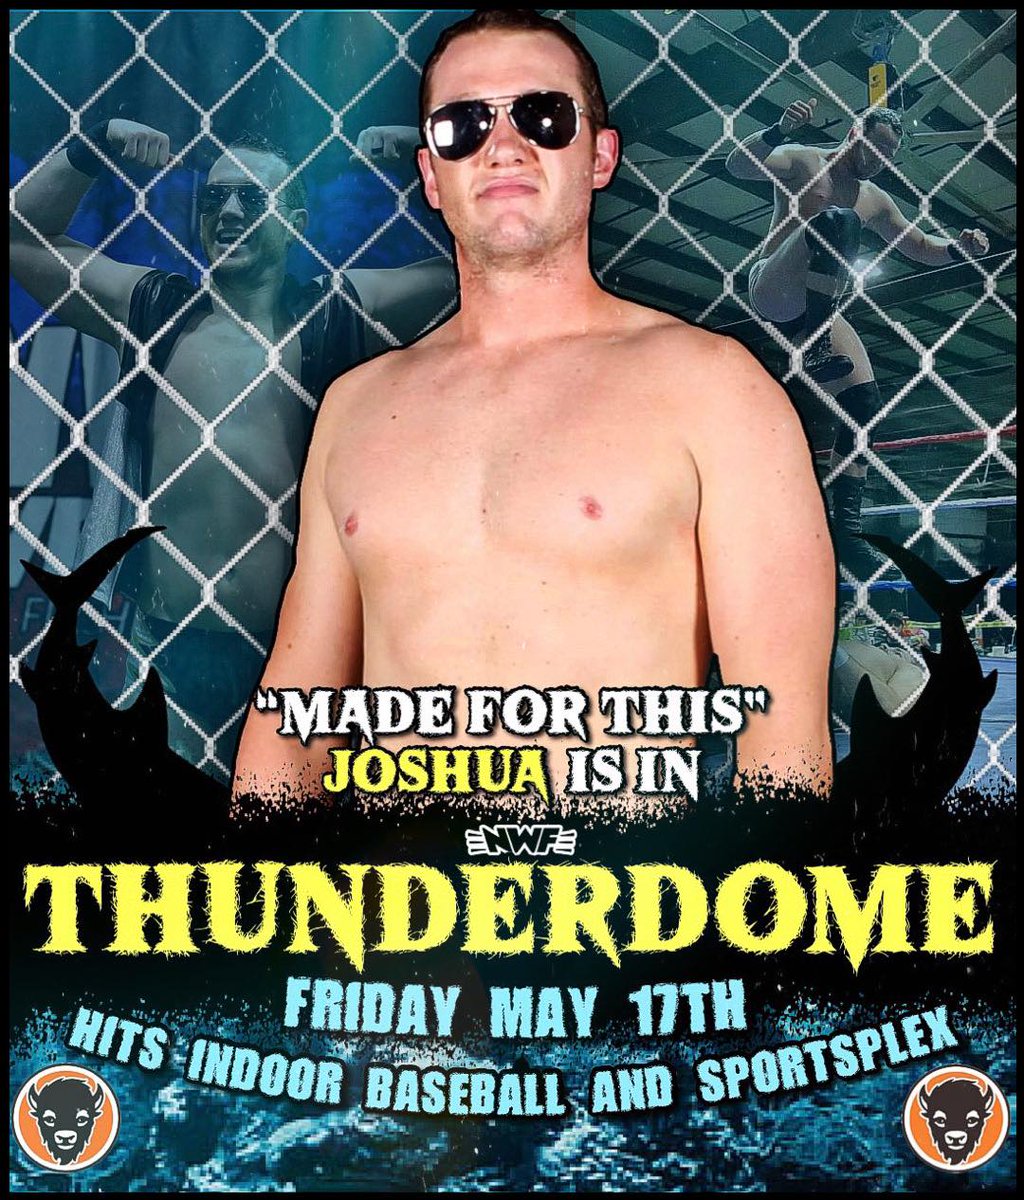 🚨 JOSHUA HAS OFFICALLY BEEN ENTERED IN THUNDERDOME! 🚨 2-time NWF Heavyweight Champion, @Joshua_MFT, enters Thunderdome on May 17th at Hits Indoor Baseball in Covington, KY! 🎟: nwfwrestling.com/events 🚪: 6:30 pm 🔔: 7:30 pm